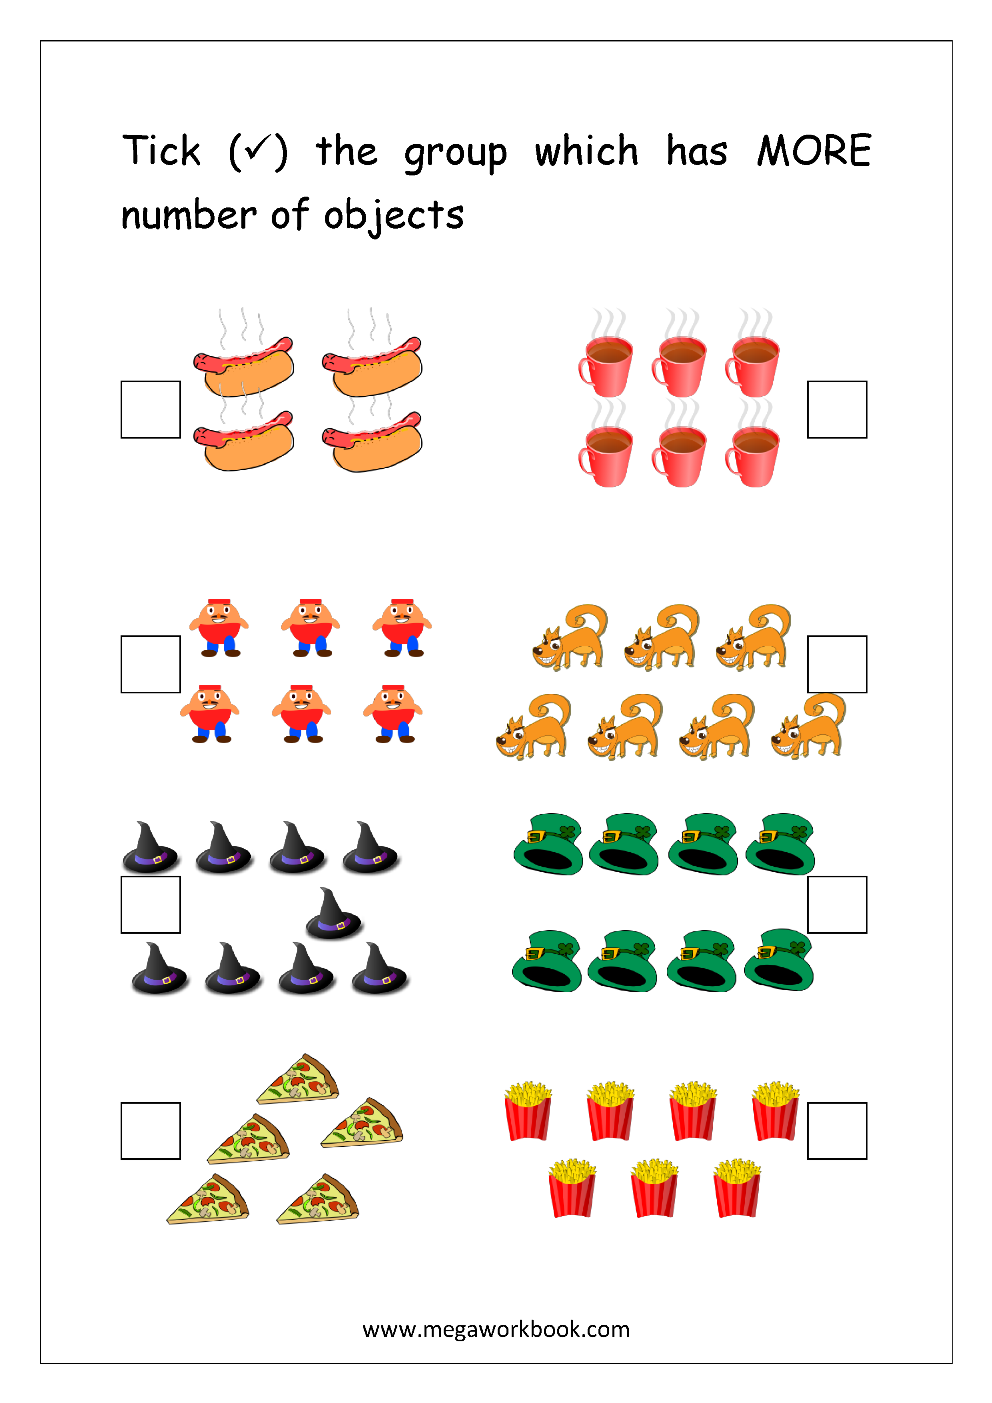 greater-than-less-than-equal-to-objects-worksheet-nipodcoco